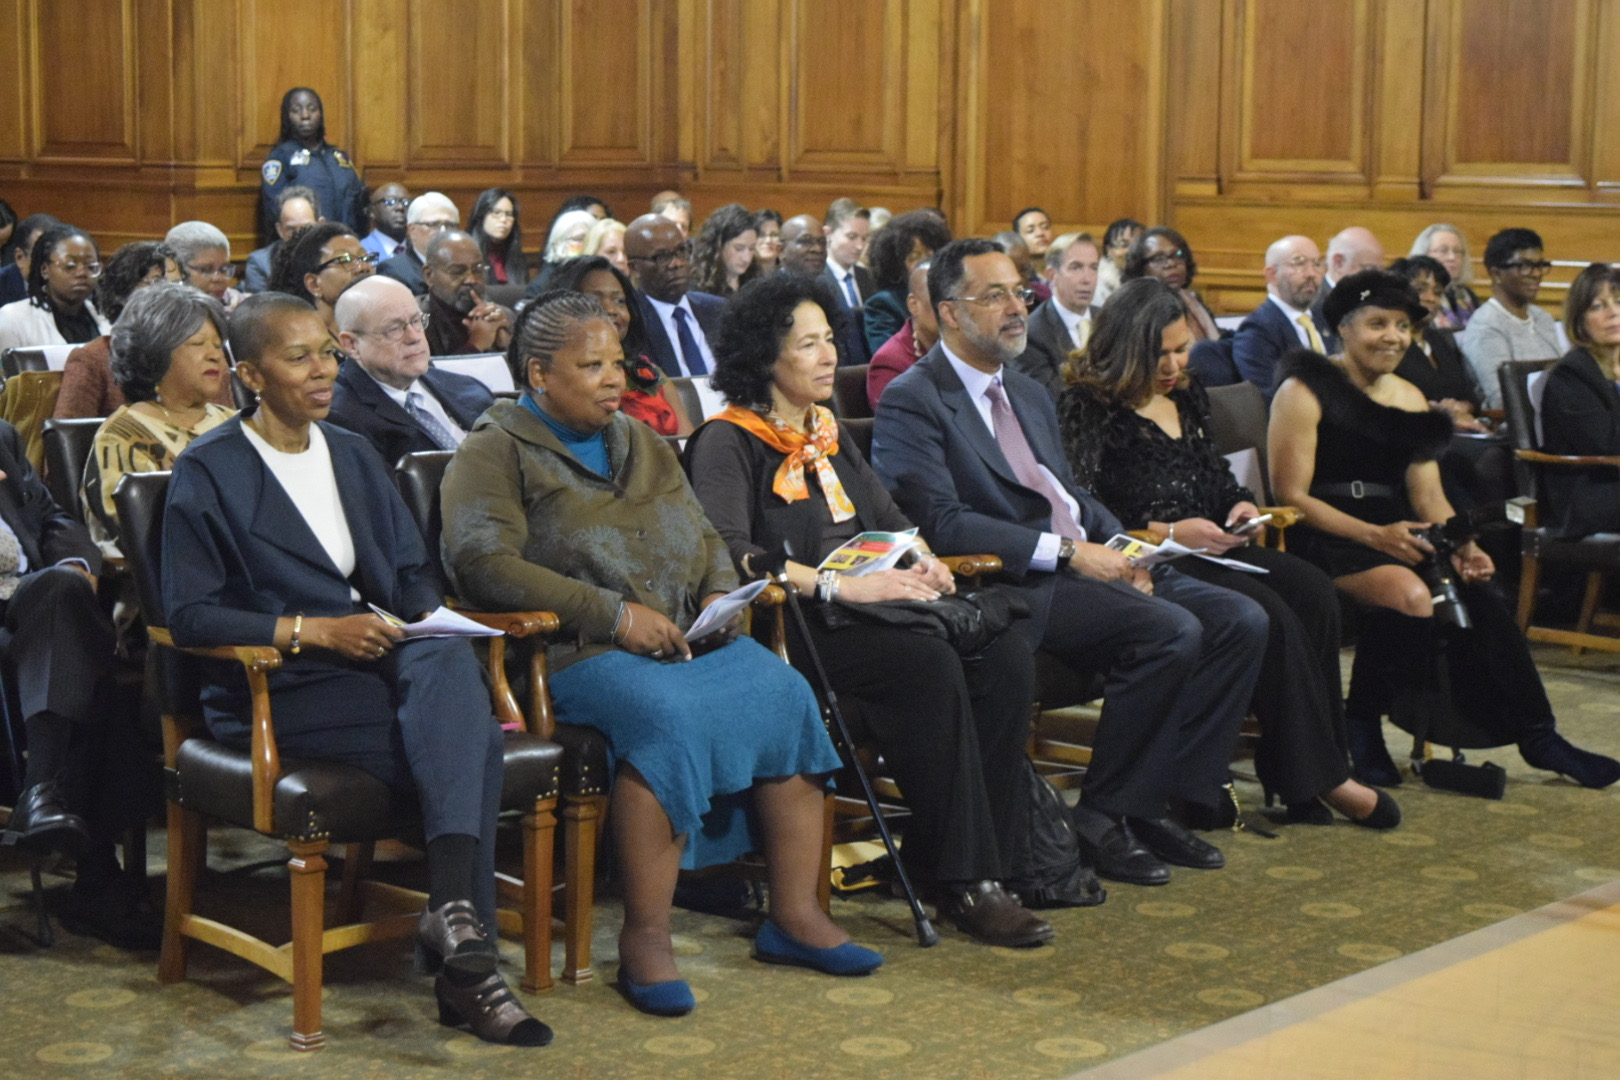 The honorees, and friends and family, of the late Justice William Thompson sitting front row at the ceremony inside of the packed courthouse at the Appellate Division, Second Department.